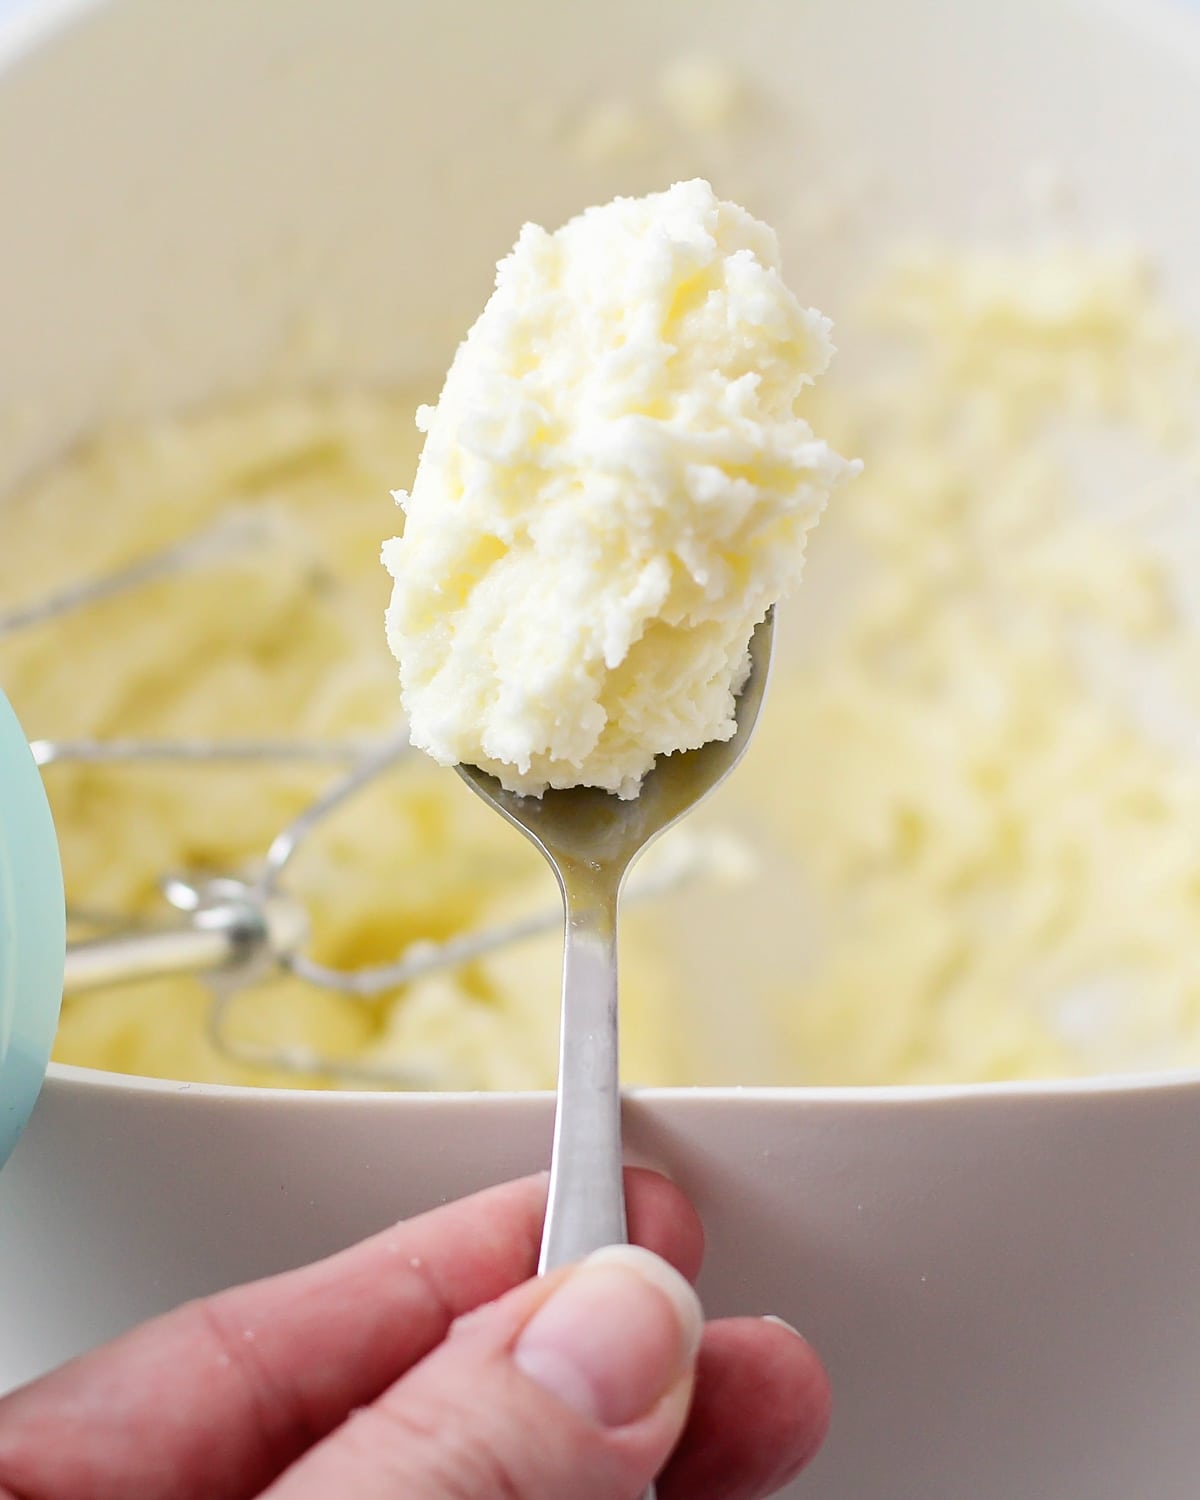 Close up of a spoon filled with butter whipped with sugar.